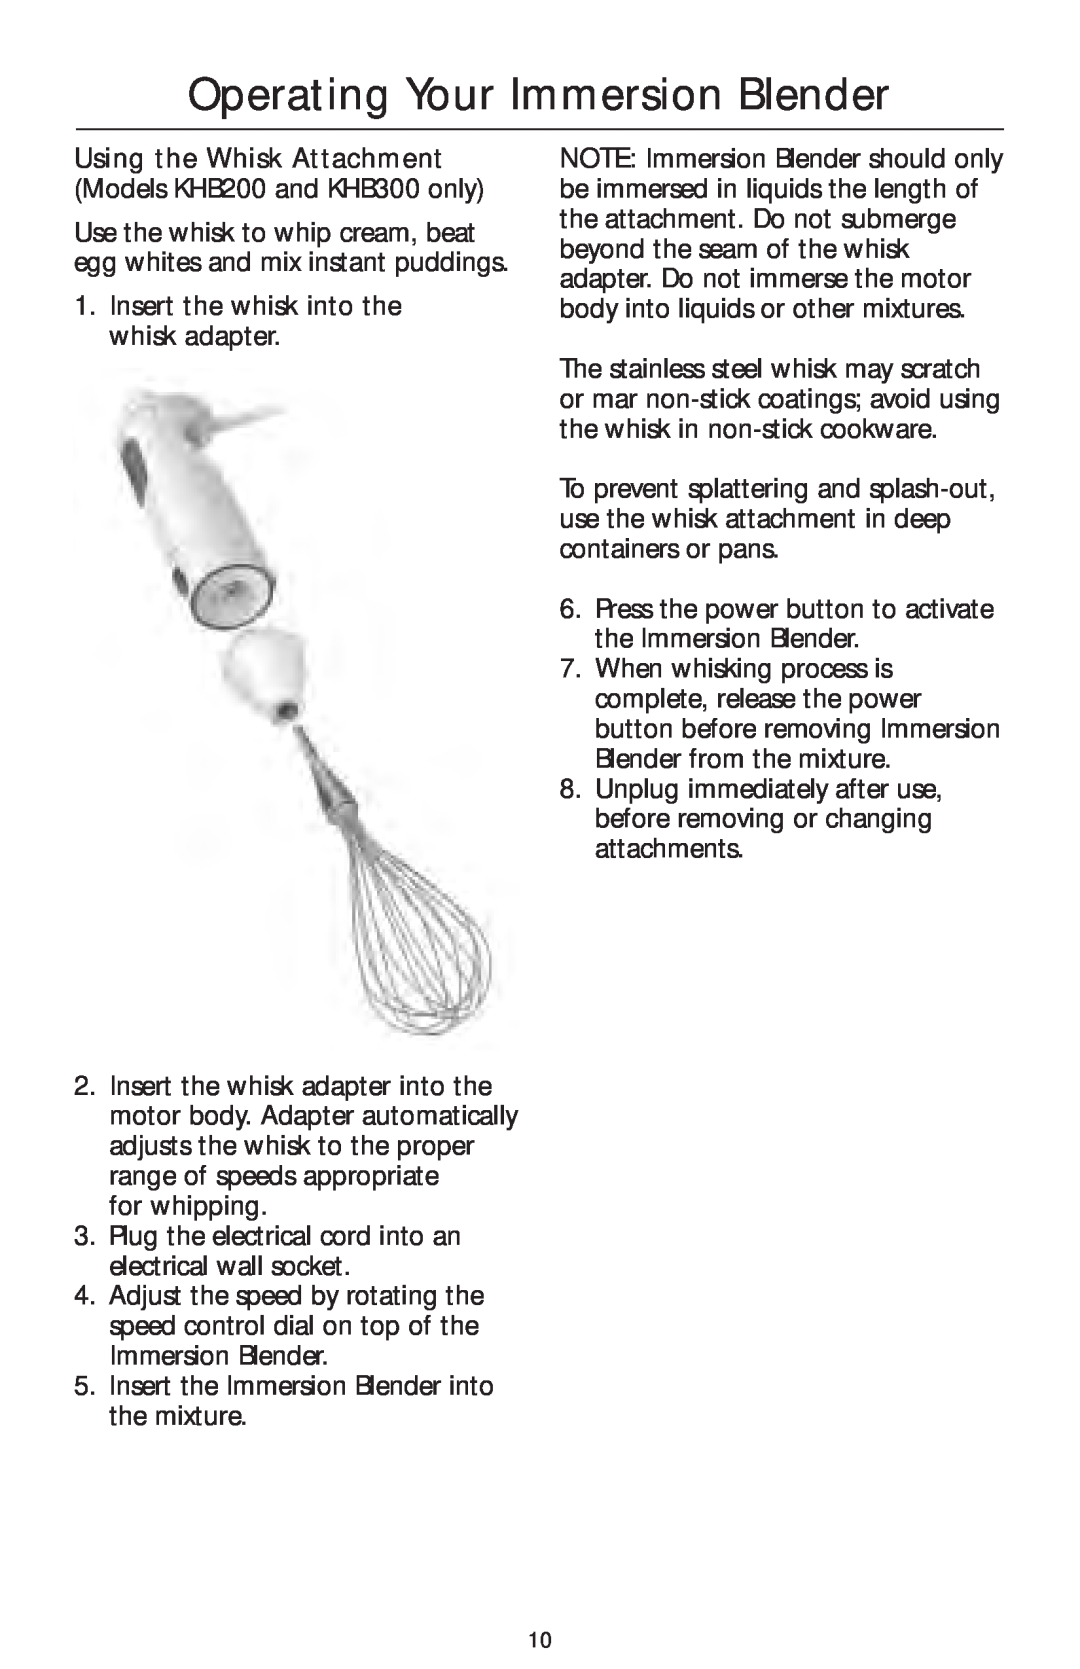 KitchenAid KHB100 Operating Your Immersion Blender, Use the whisk to whip cream, beat egg whites and mix instant puddings 